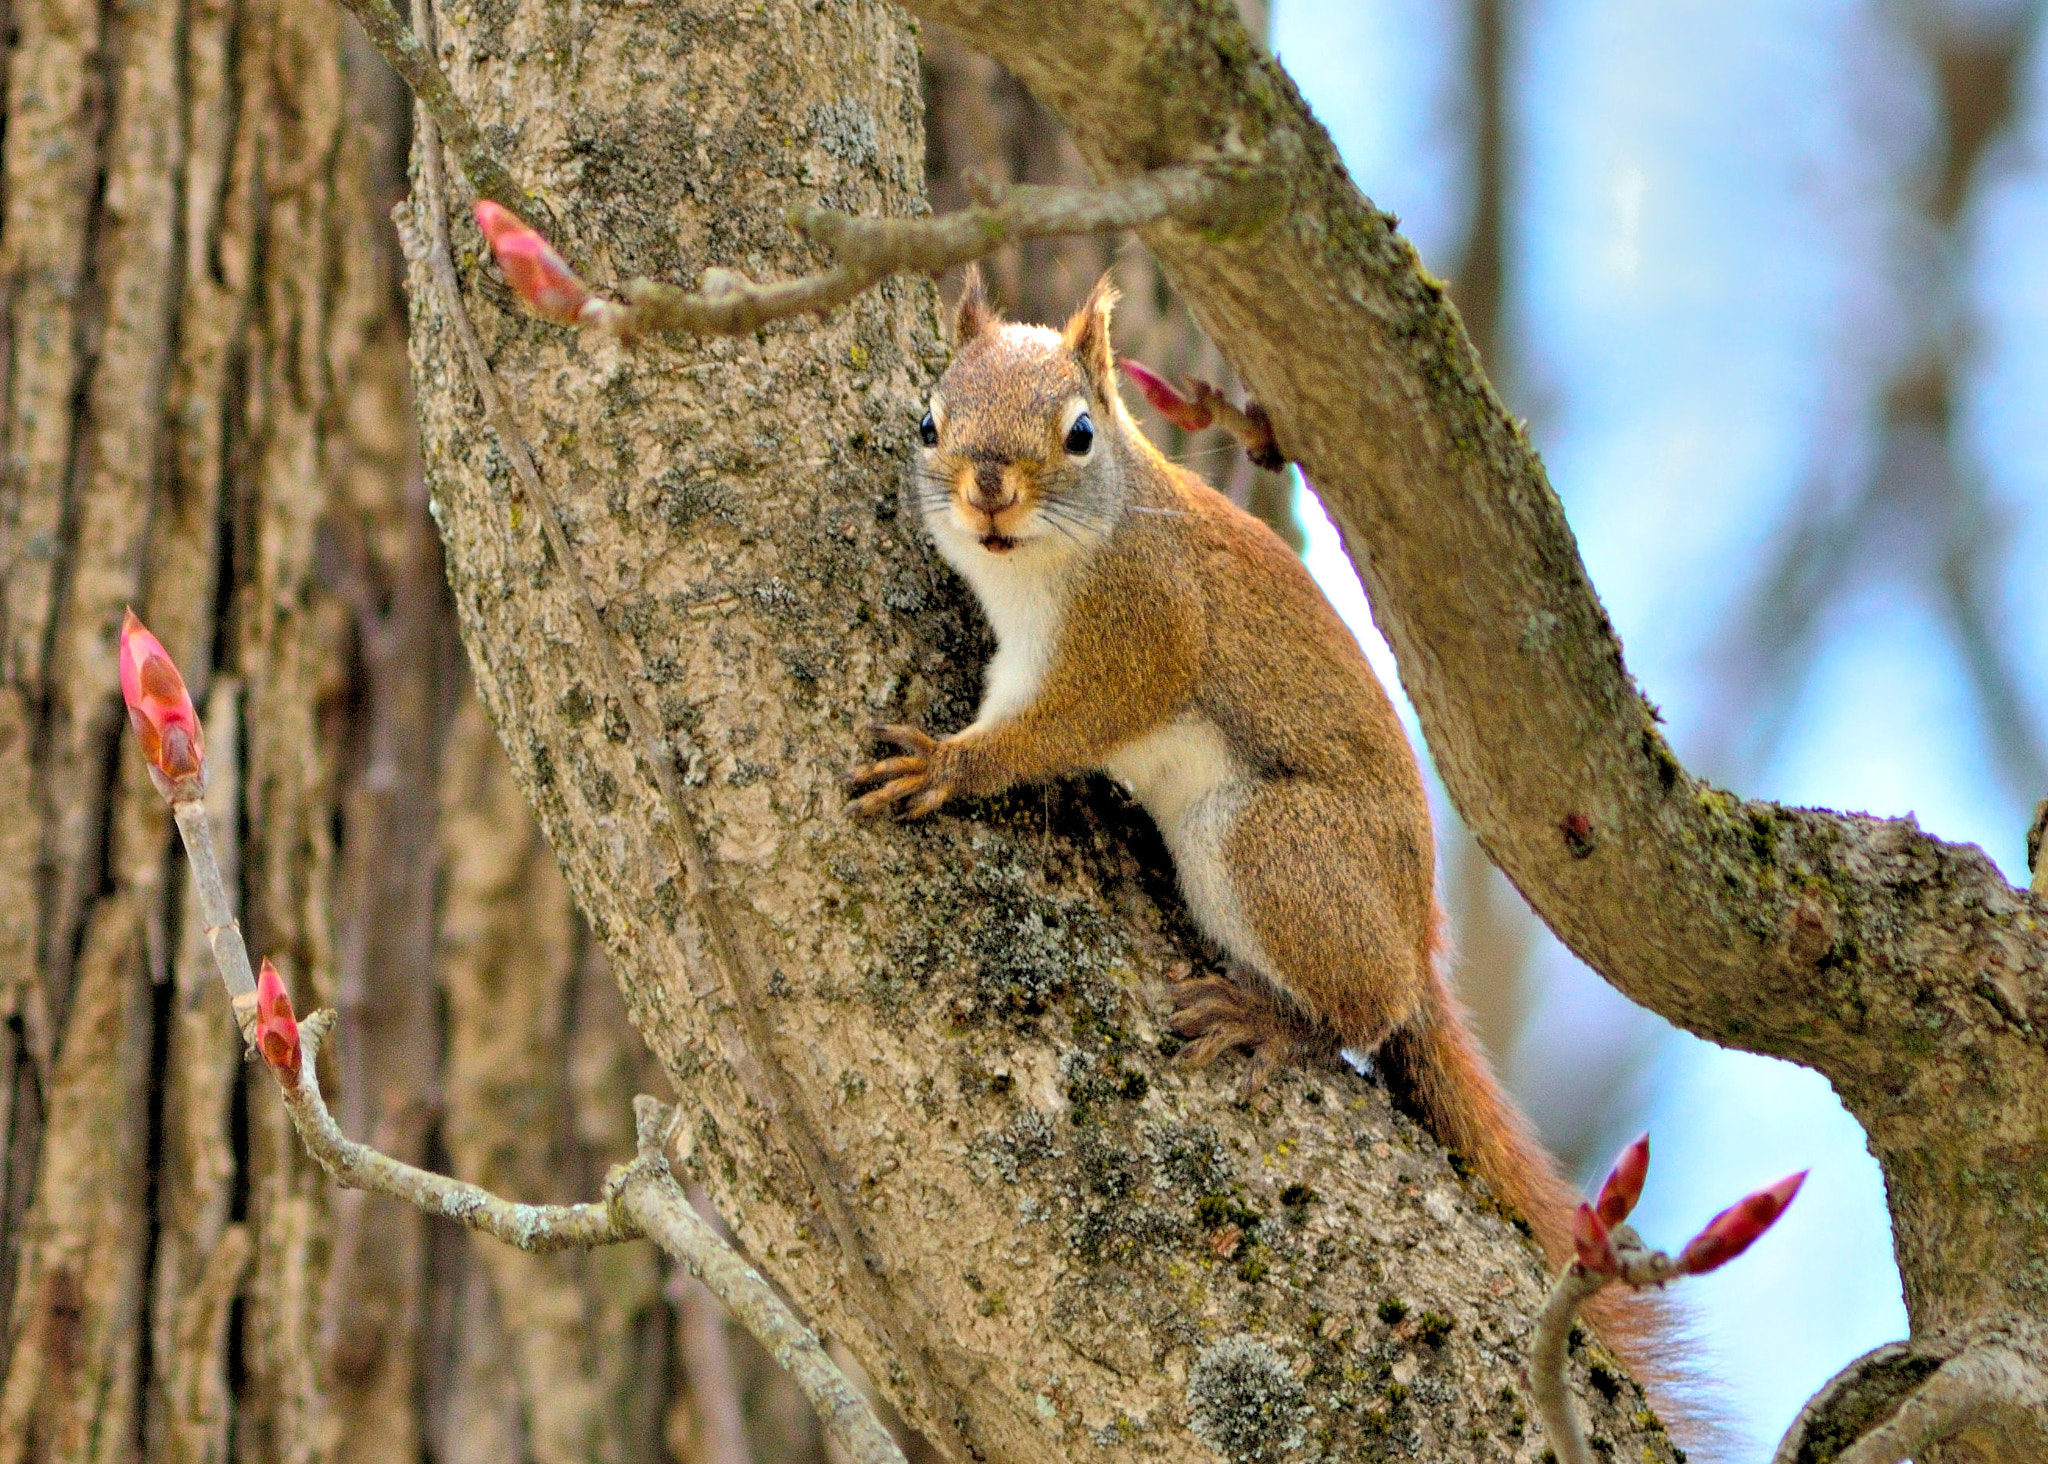 AF Zoom-Nikkor 75-300mm f/4.5-5.6 sample photo. Curious squirrel photography